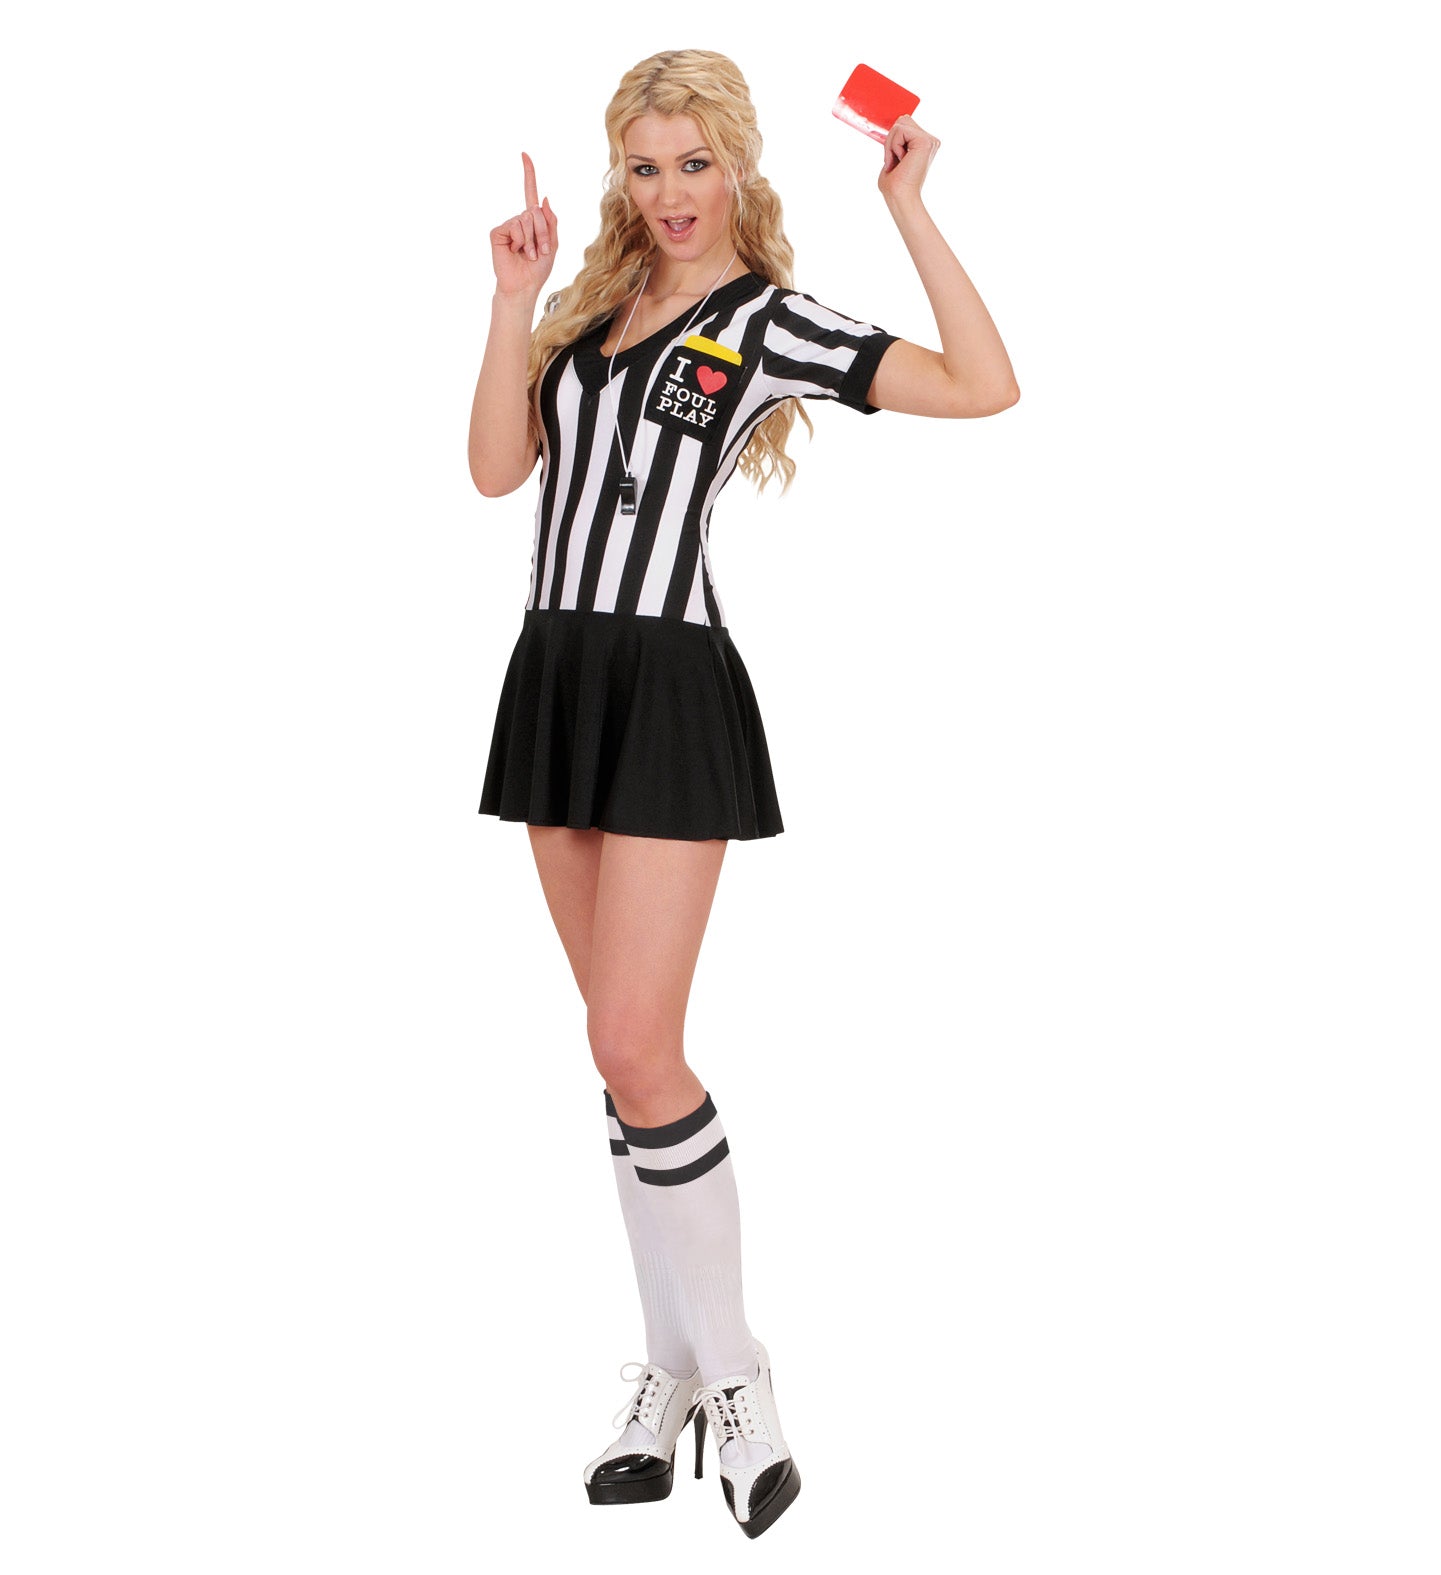 Foul Play Referee outfit for women